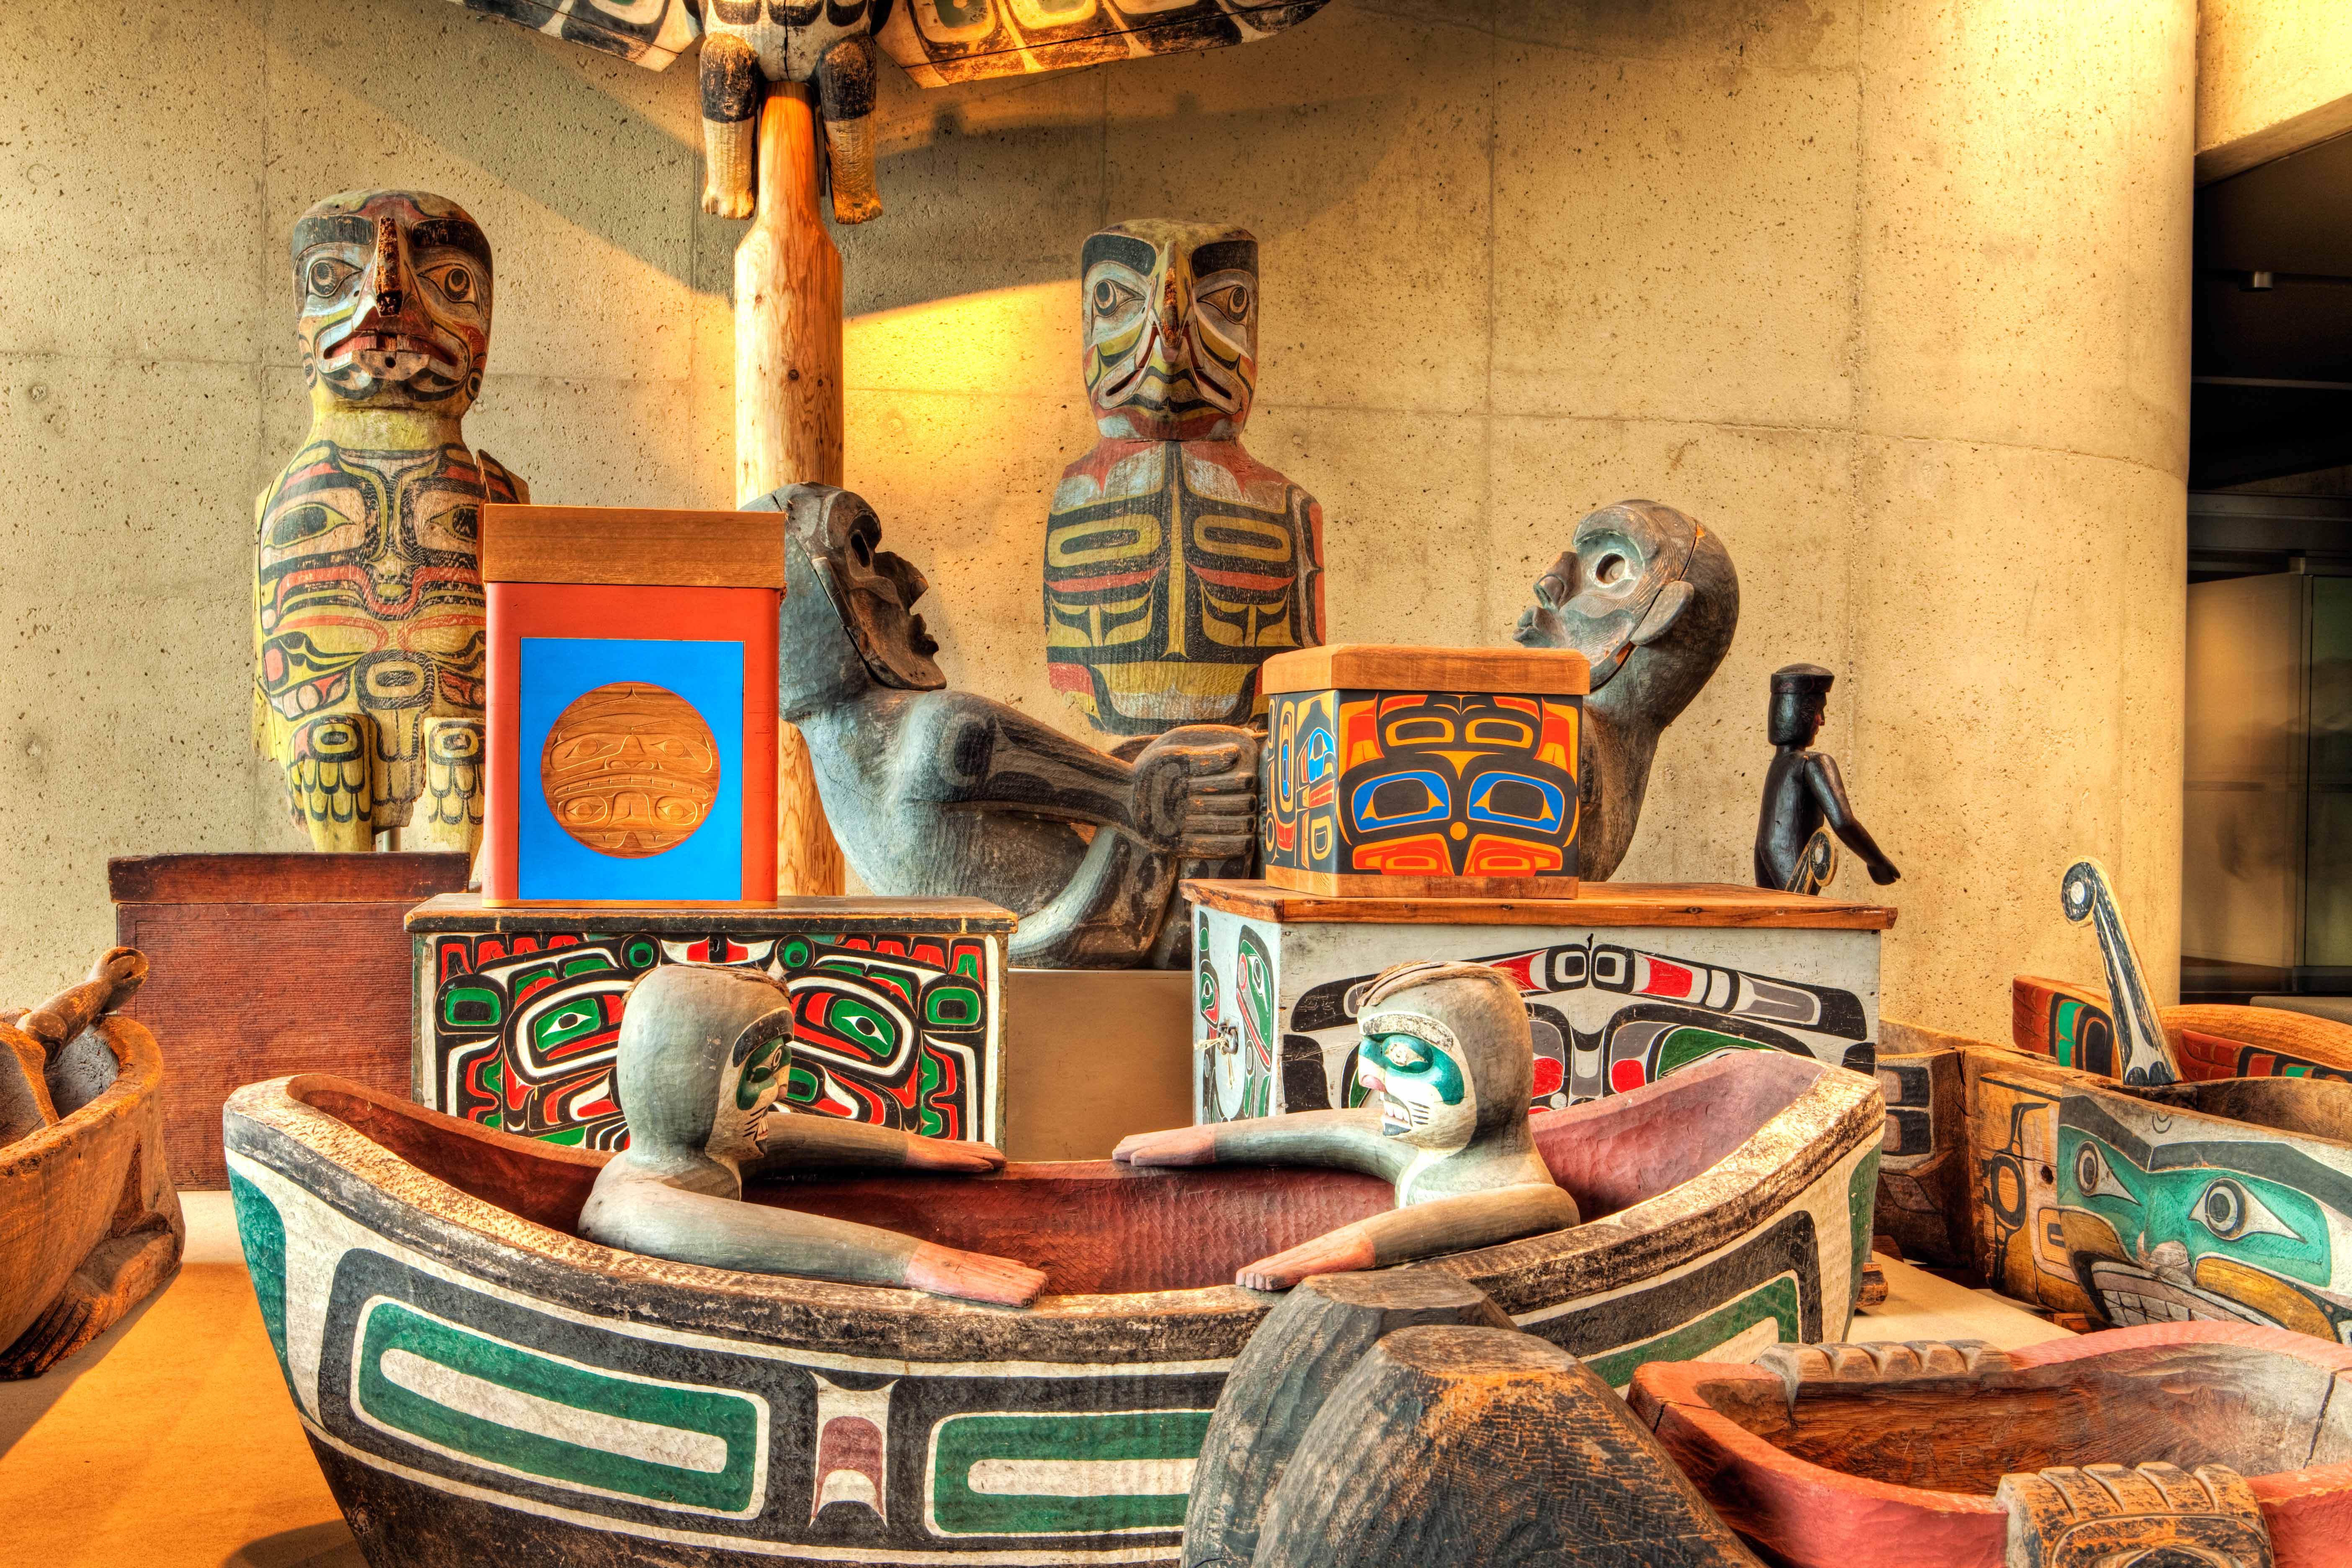 Haida art on display in the MOA's Great Hall. Image by Klaus Lang / All Canada Photos / Getty